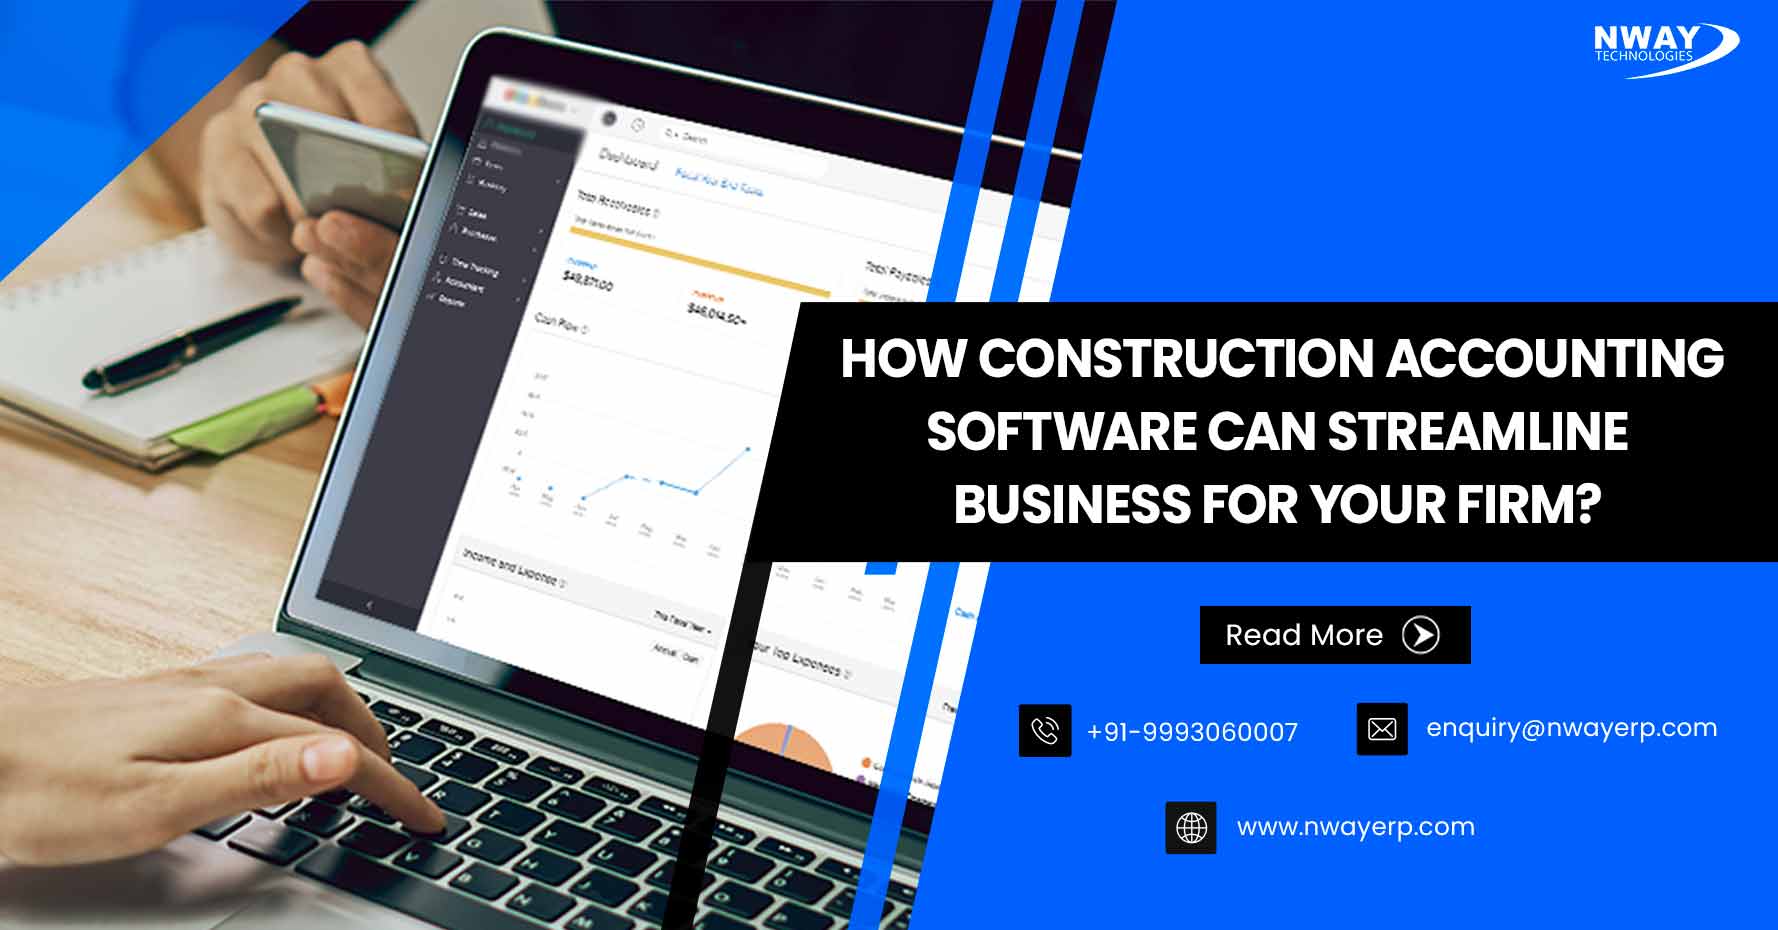 How Construction Accounting Software Can Streamline Business for your Firm?